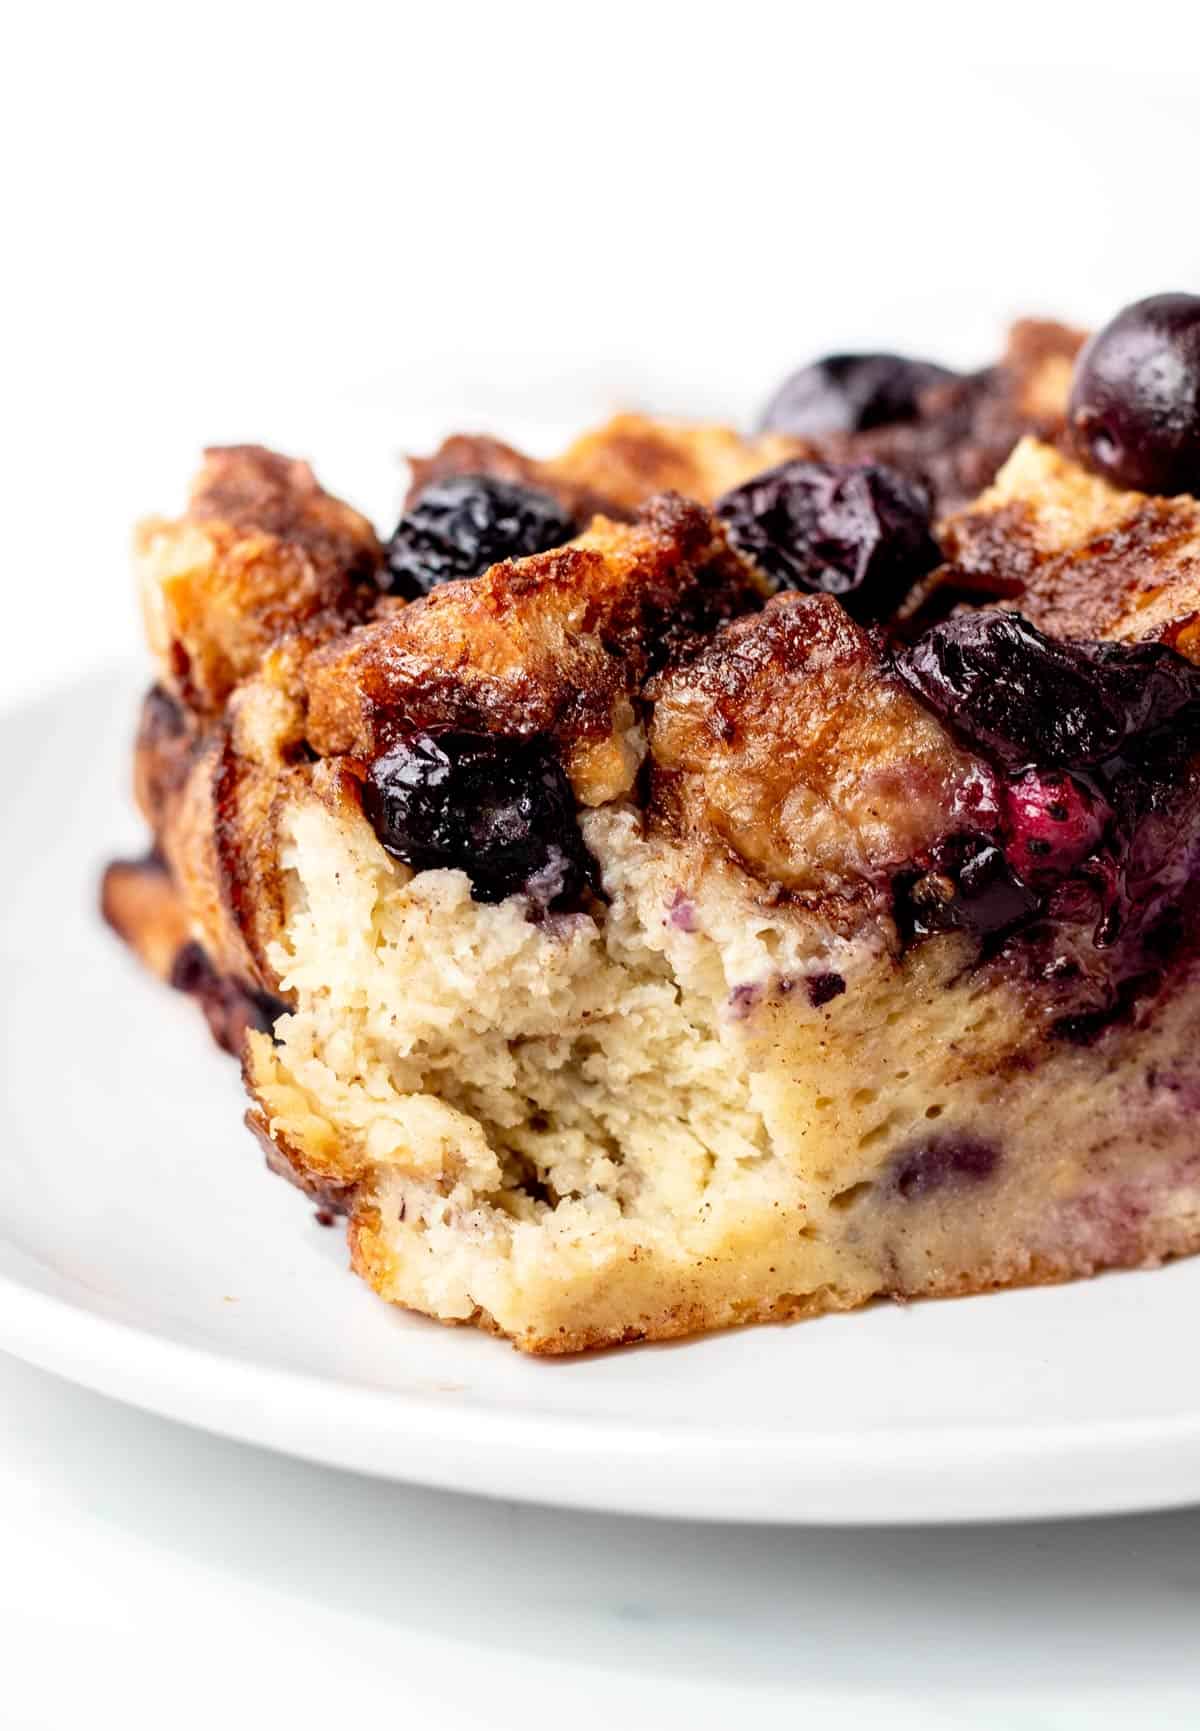 A close up of the inside texture of a piece of blueberry French toast casserole on a plate.